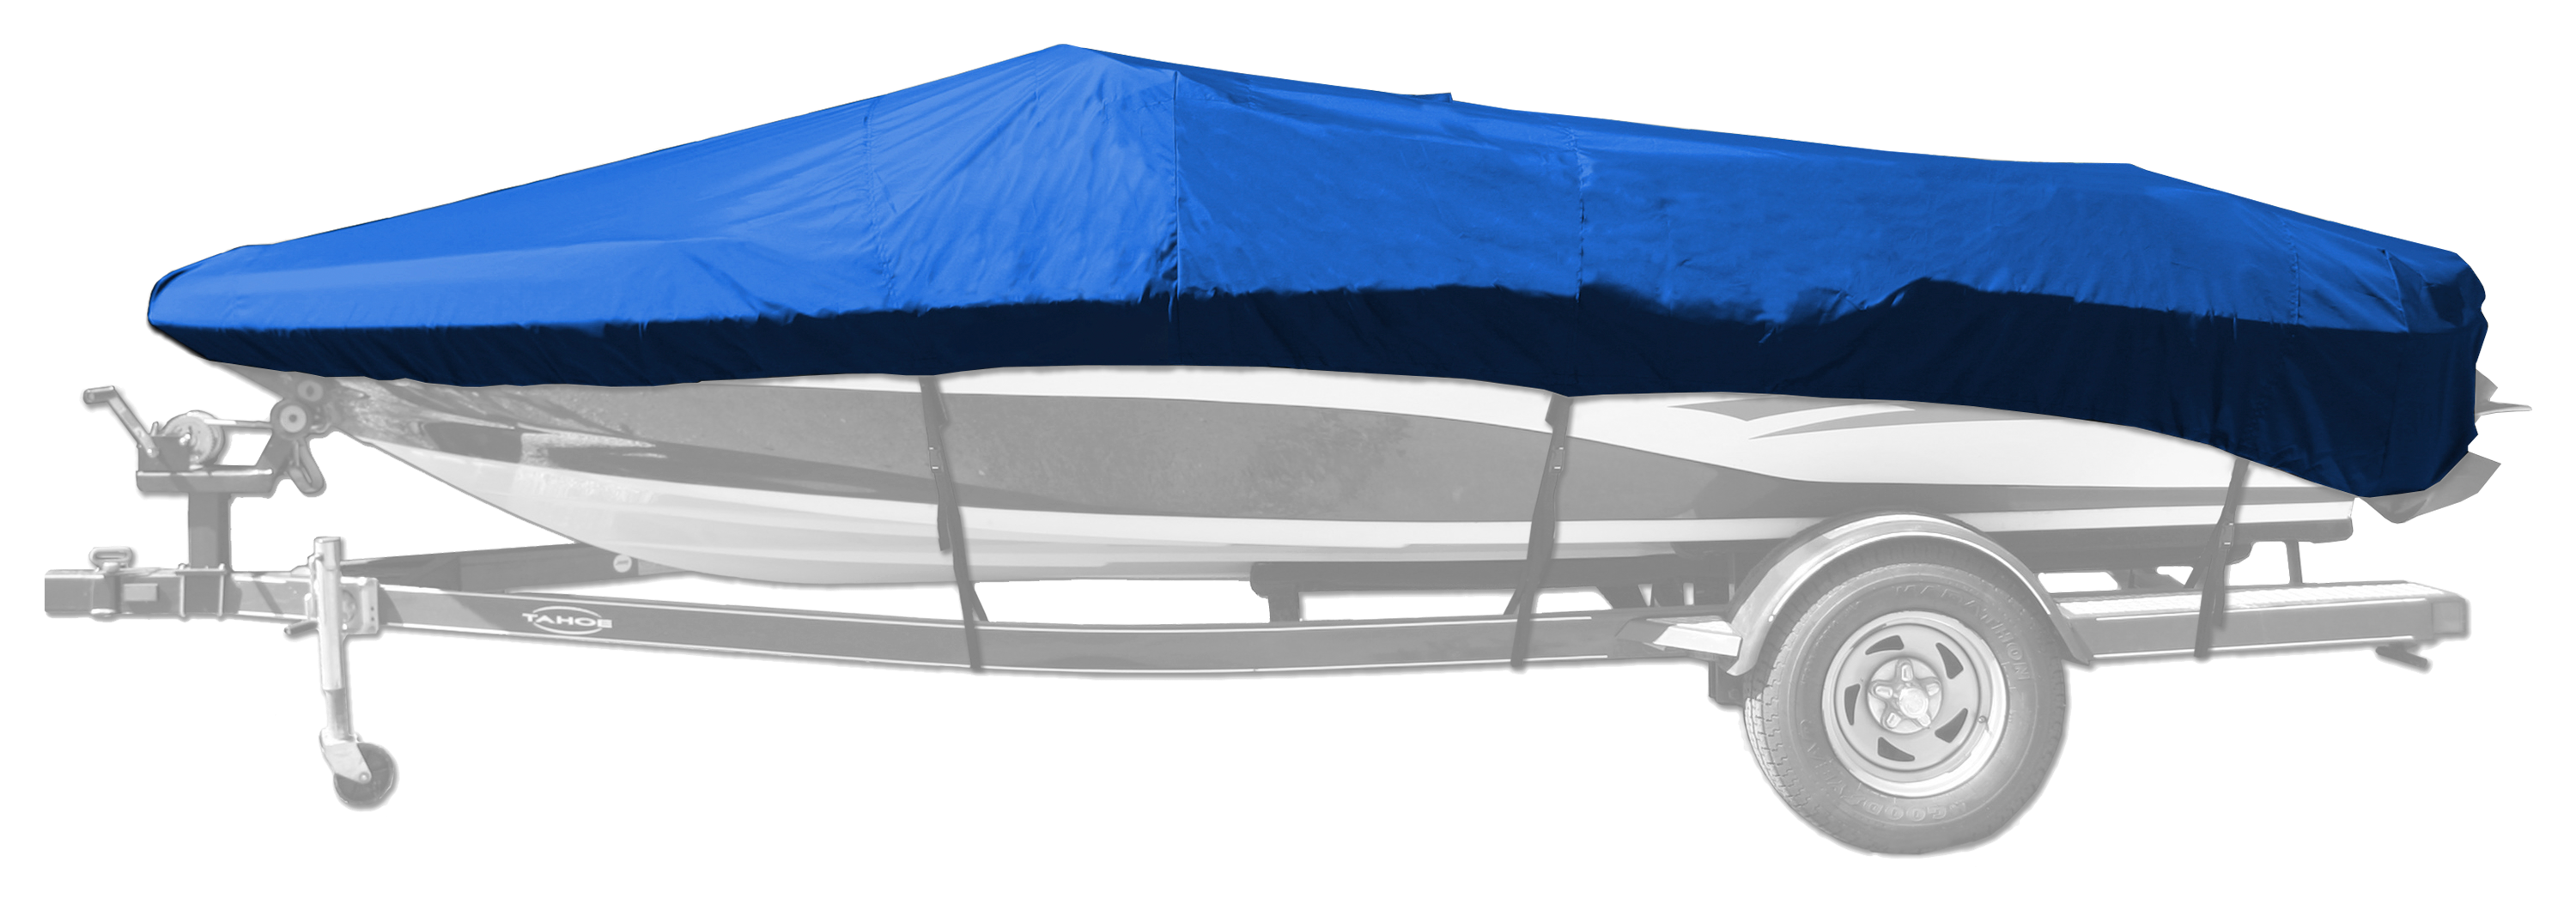 Bass Pro Shops Select Fit Hurricane Boat Cover by Westland for Euro V-Hull Runabout I/O Model - Blue - 19'6'' to 20'5